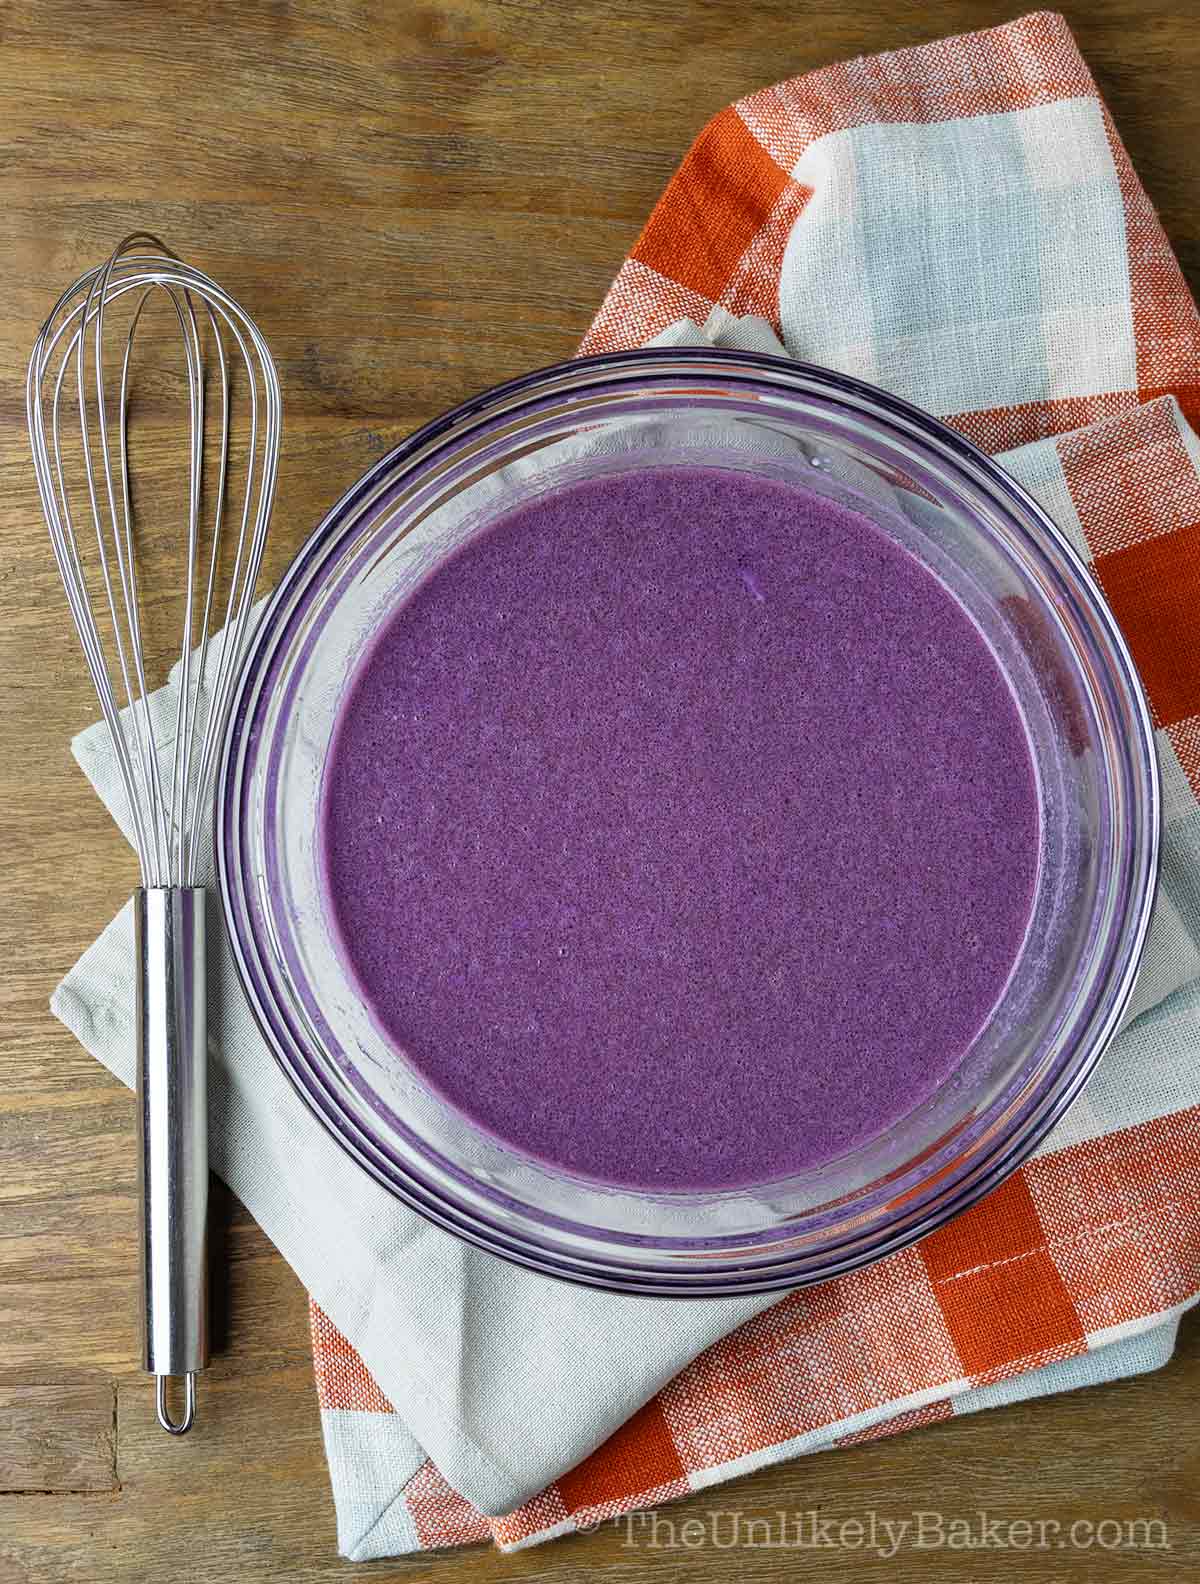 Ube buttermilk mixture in a bowl.